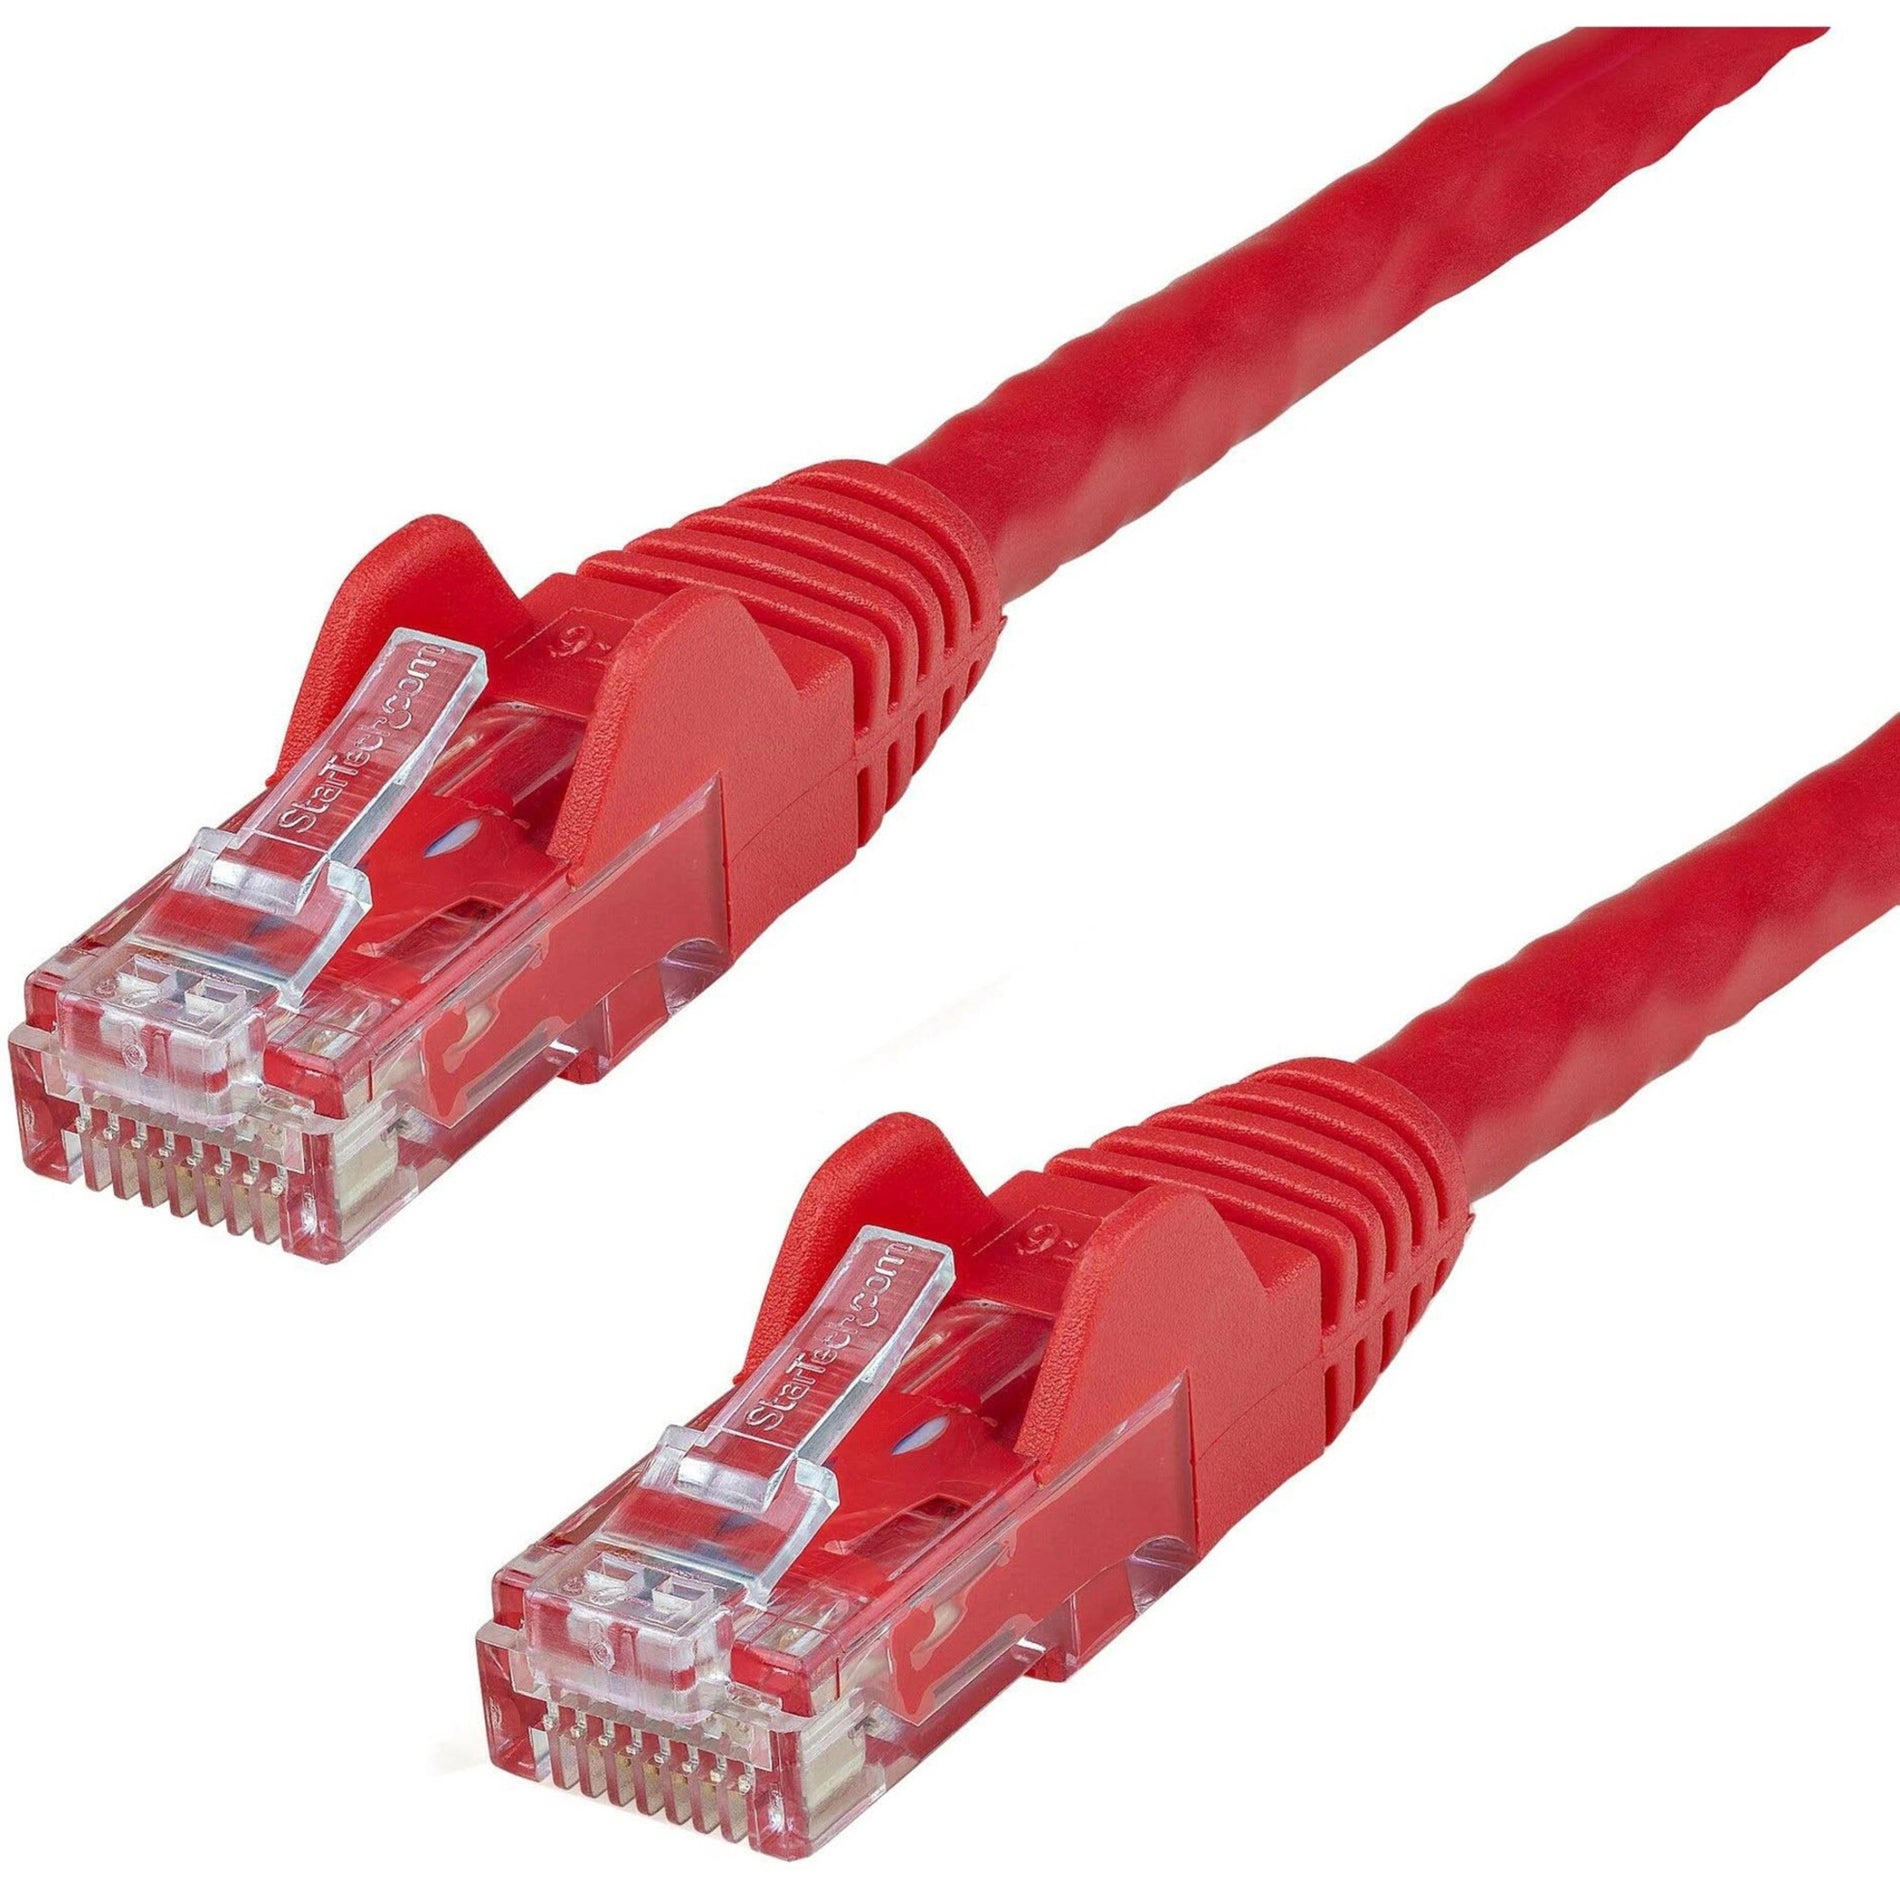 StarTech.com N6PATCH15RD 15 ft Red Snagless Cat6 UTP Patch Cable, Molded, 10 Gbit/s, Lifetime Warranty